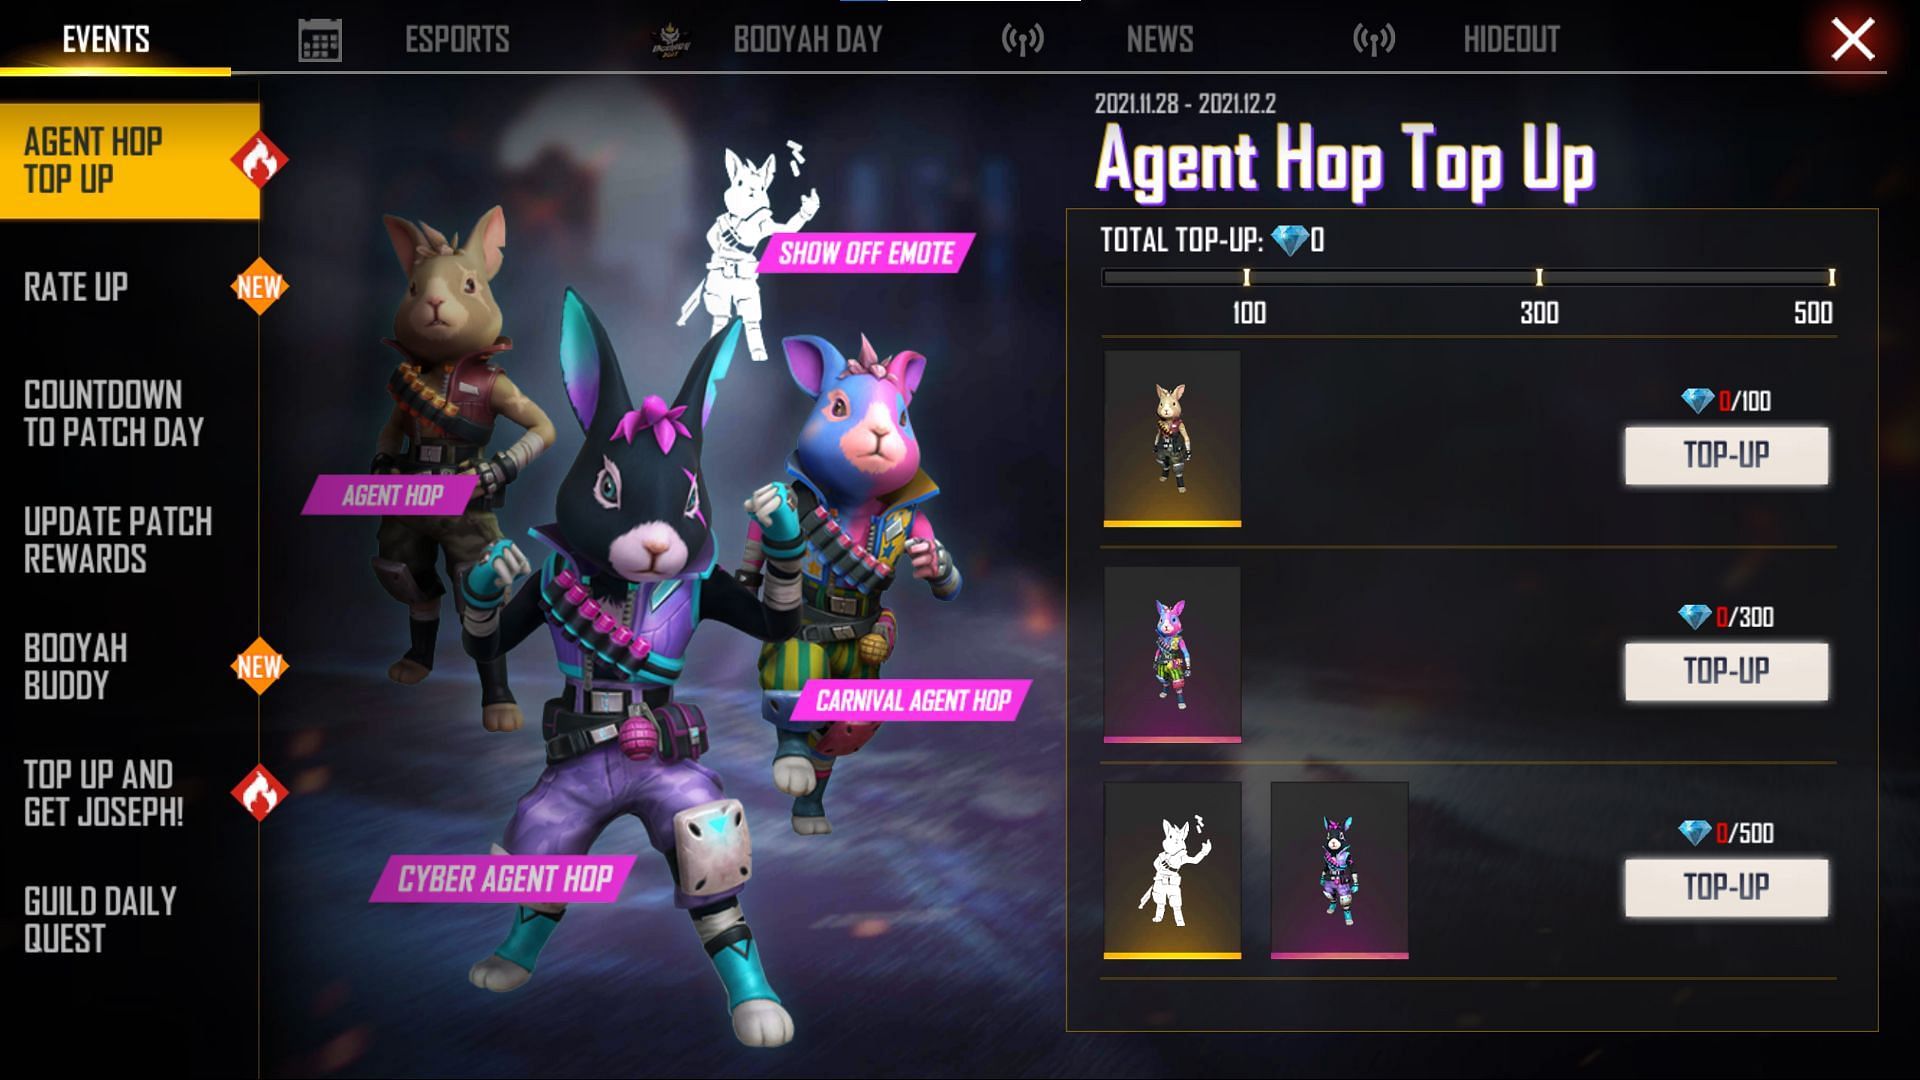 Users can top up to get the rewards (Image via Free Fire)